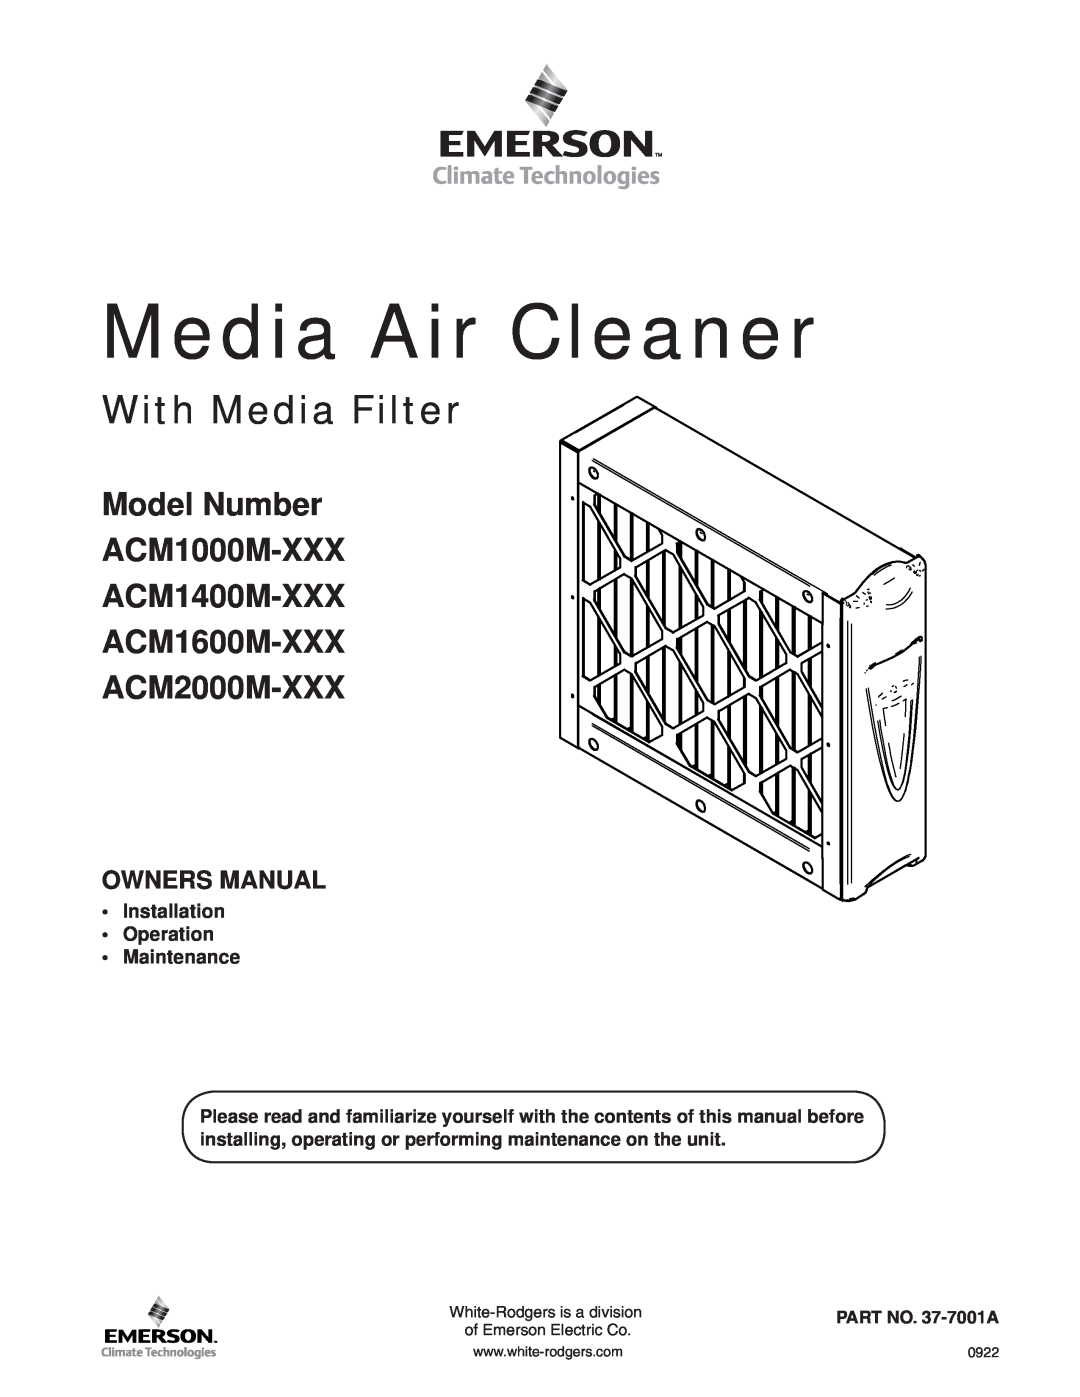 Emerson owner manual Media Air Cleaner, With Media Filter, Model Number ACM1000M-XXX ACM1400M-XXX, PART NO. 37-7001A 